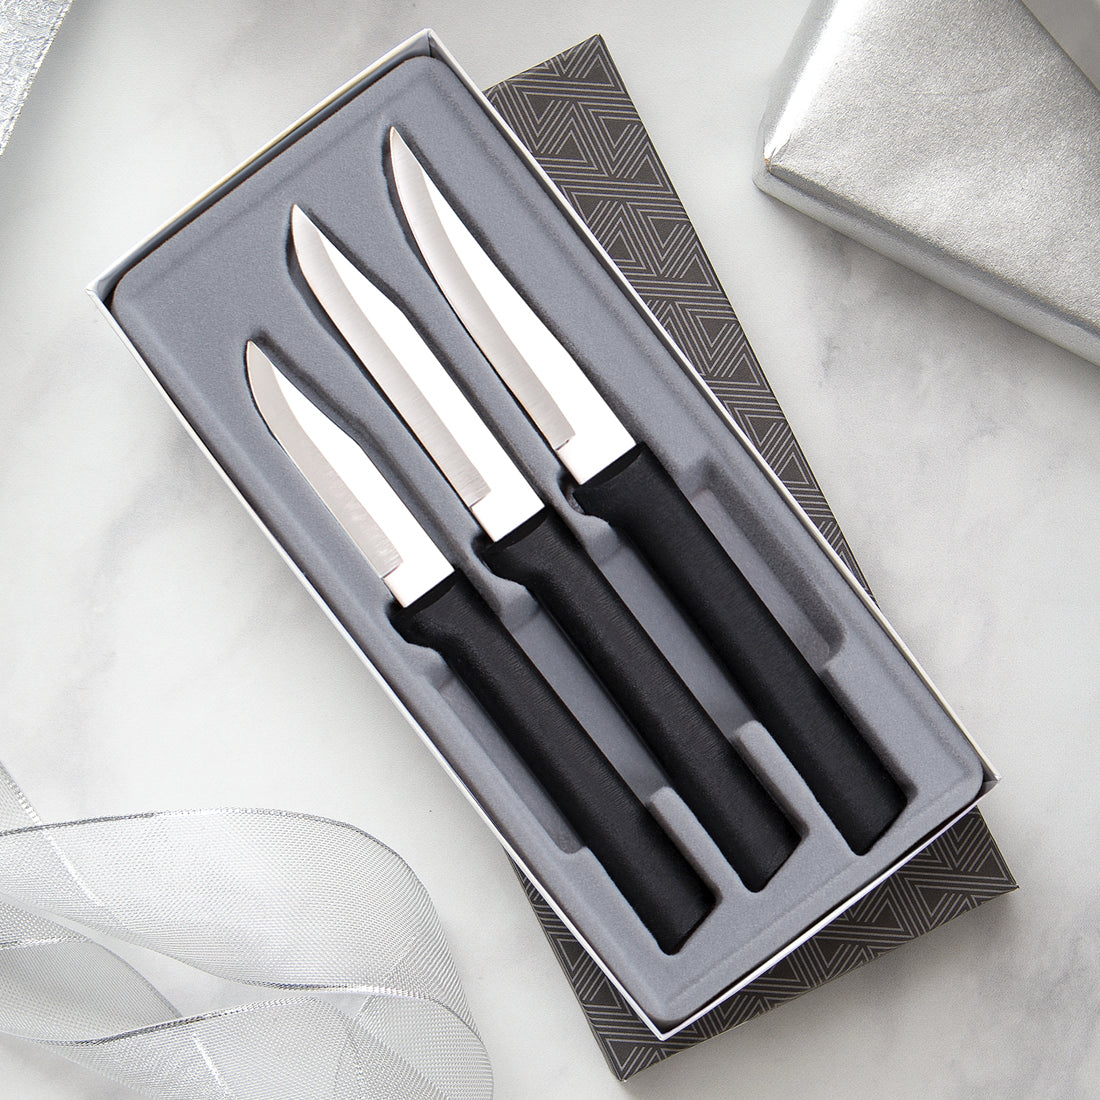 Rada Cutlery 2-Piece Paring Knife Set and Knife Sharpener – Stainless Steel  Blades With Aluminum Handles 